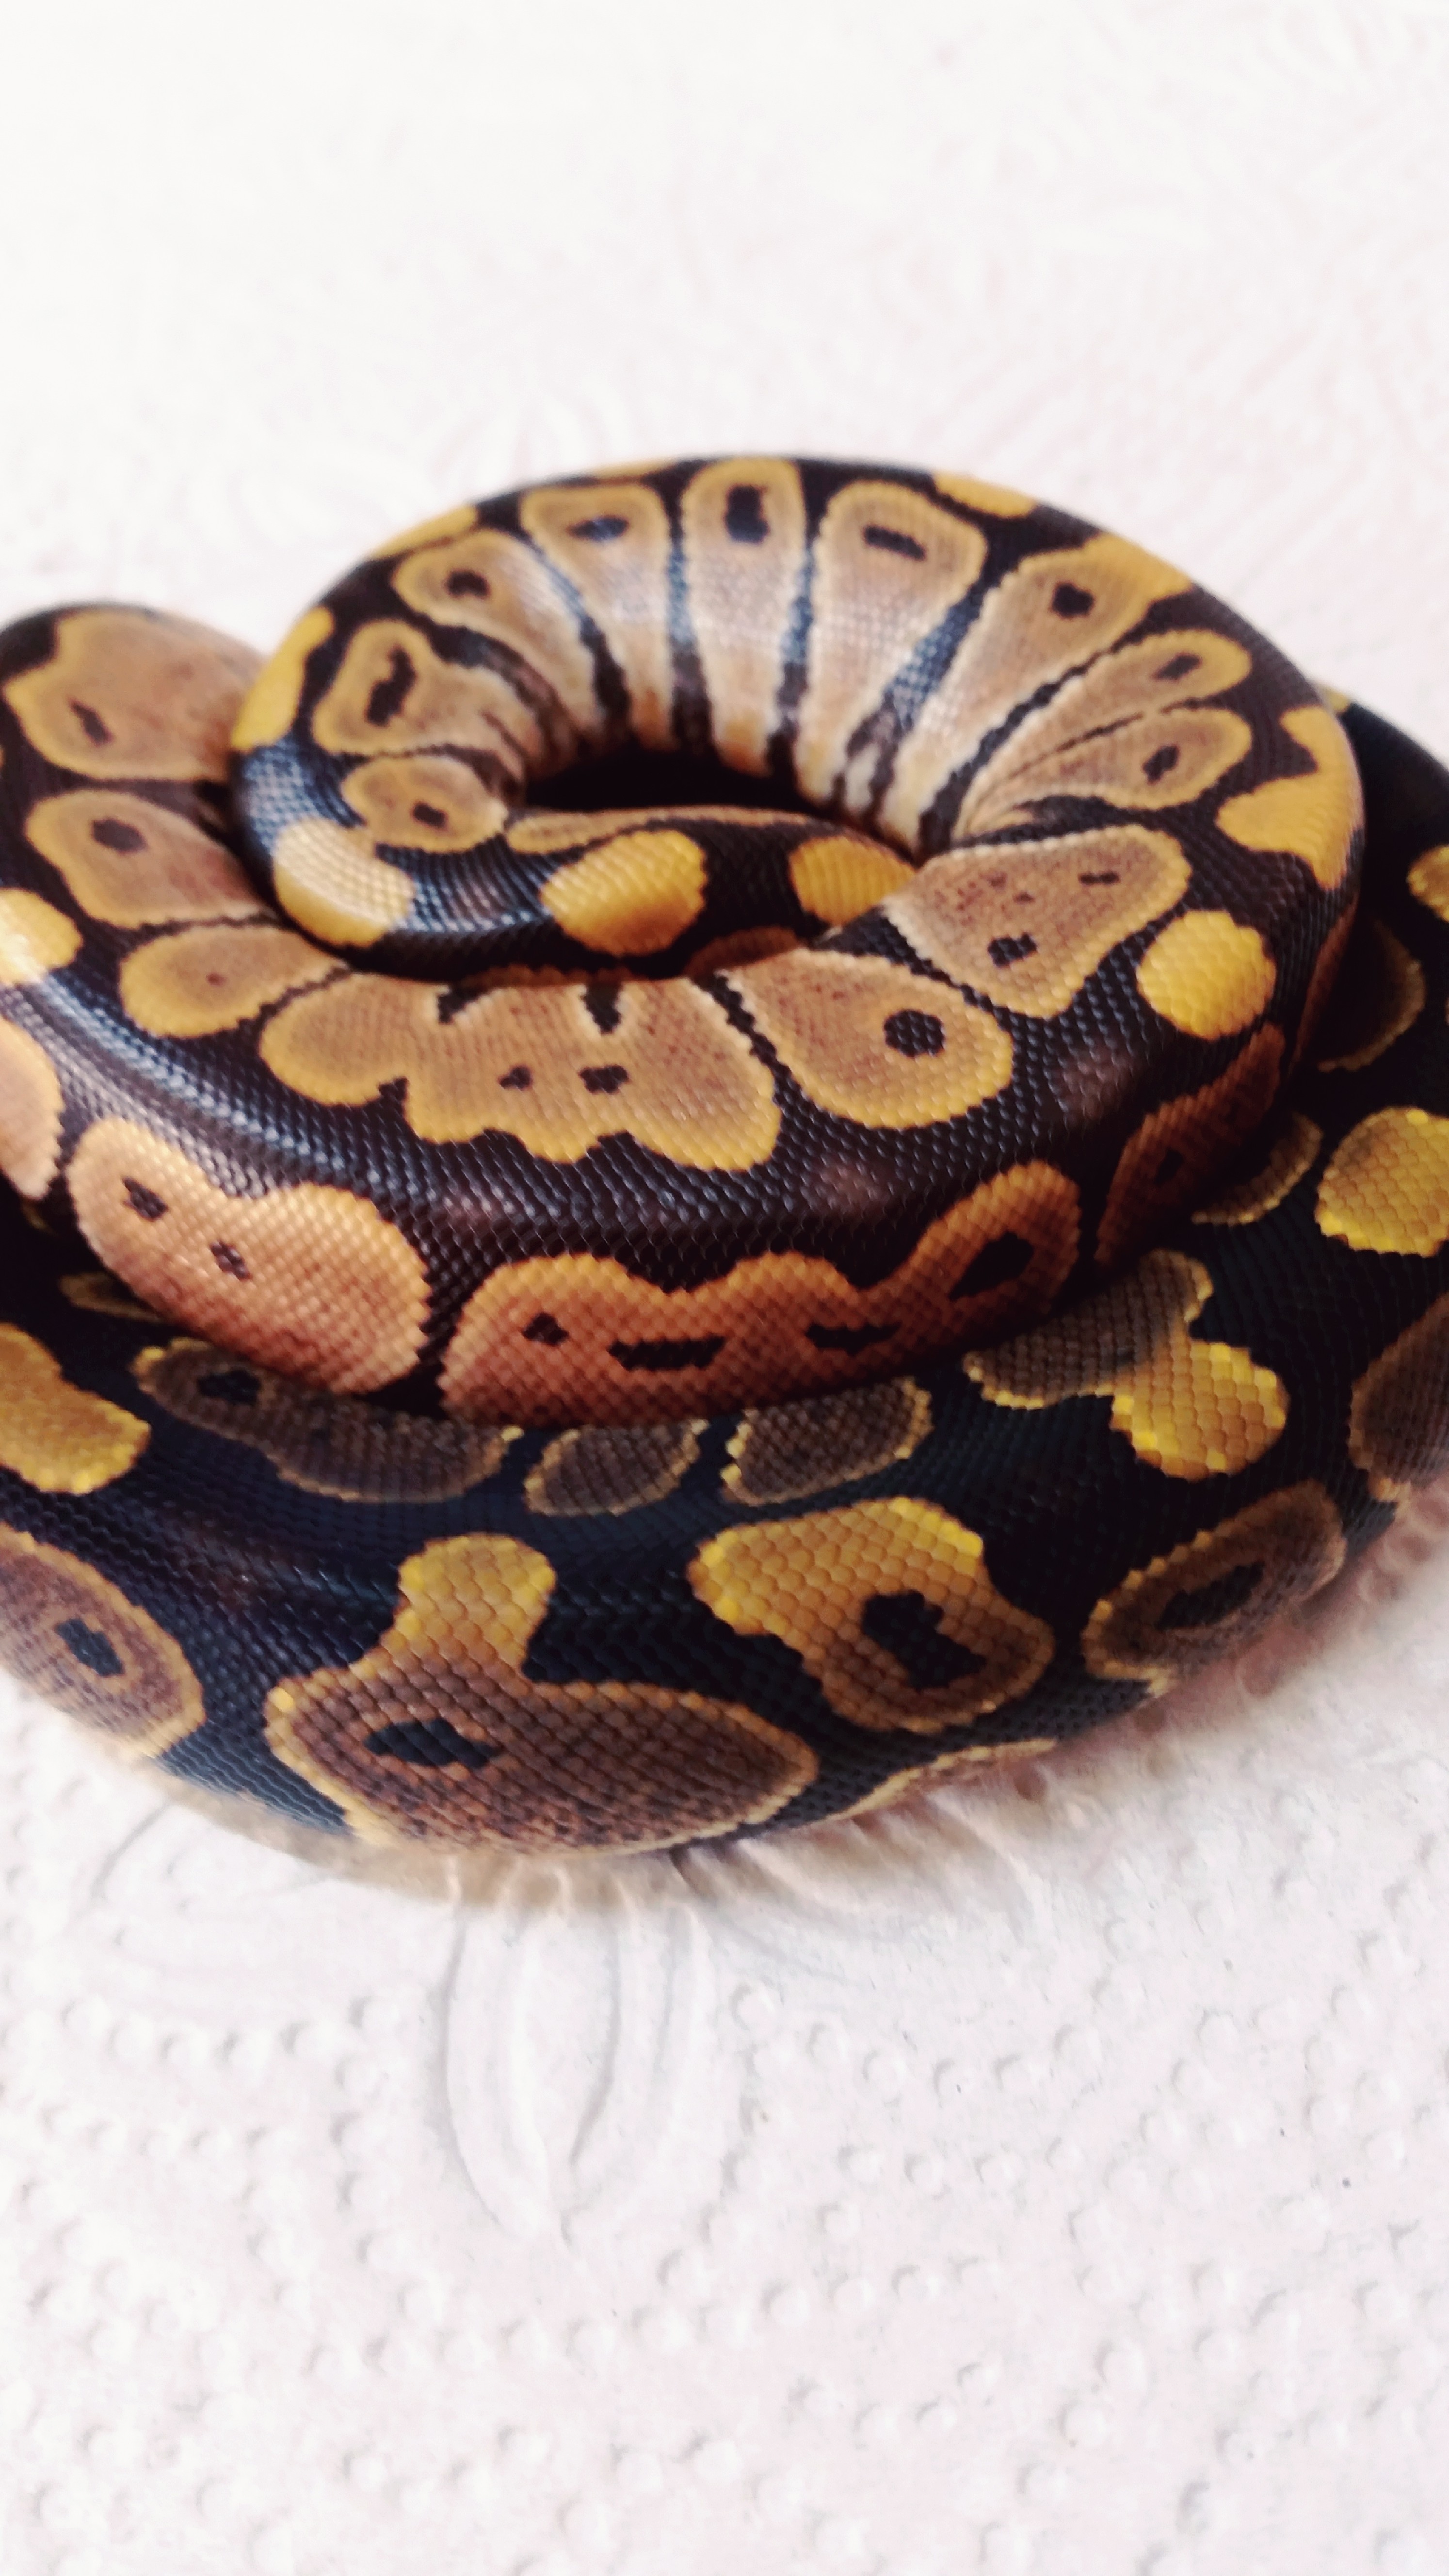 Red Gene Ball Python by HB&B Reptiles